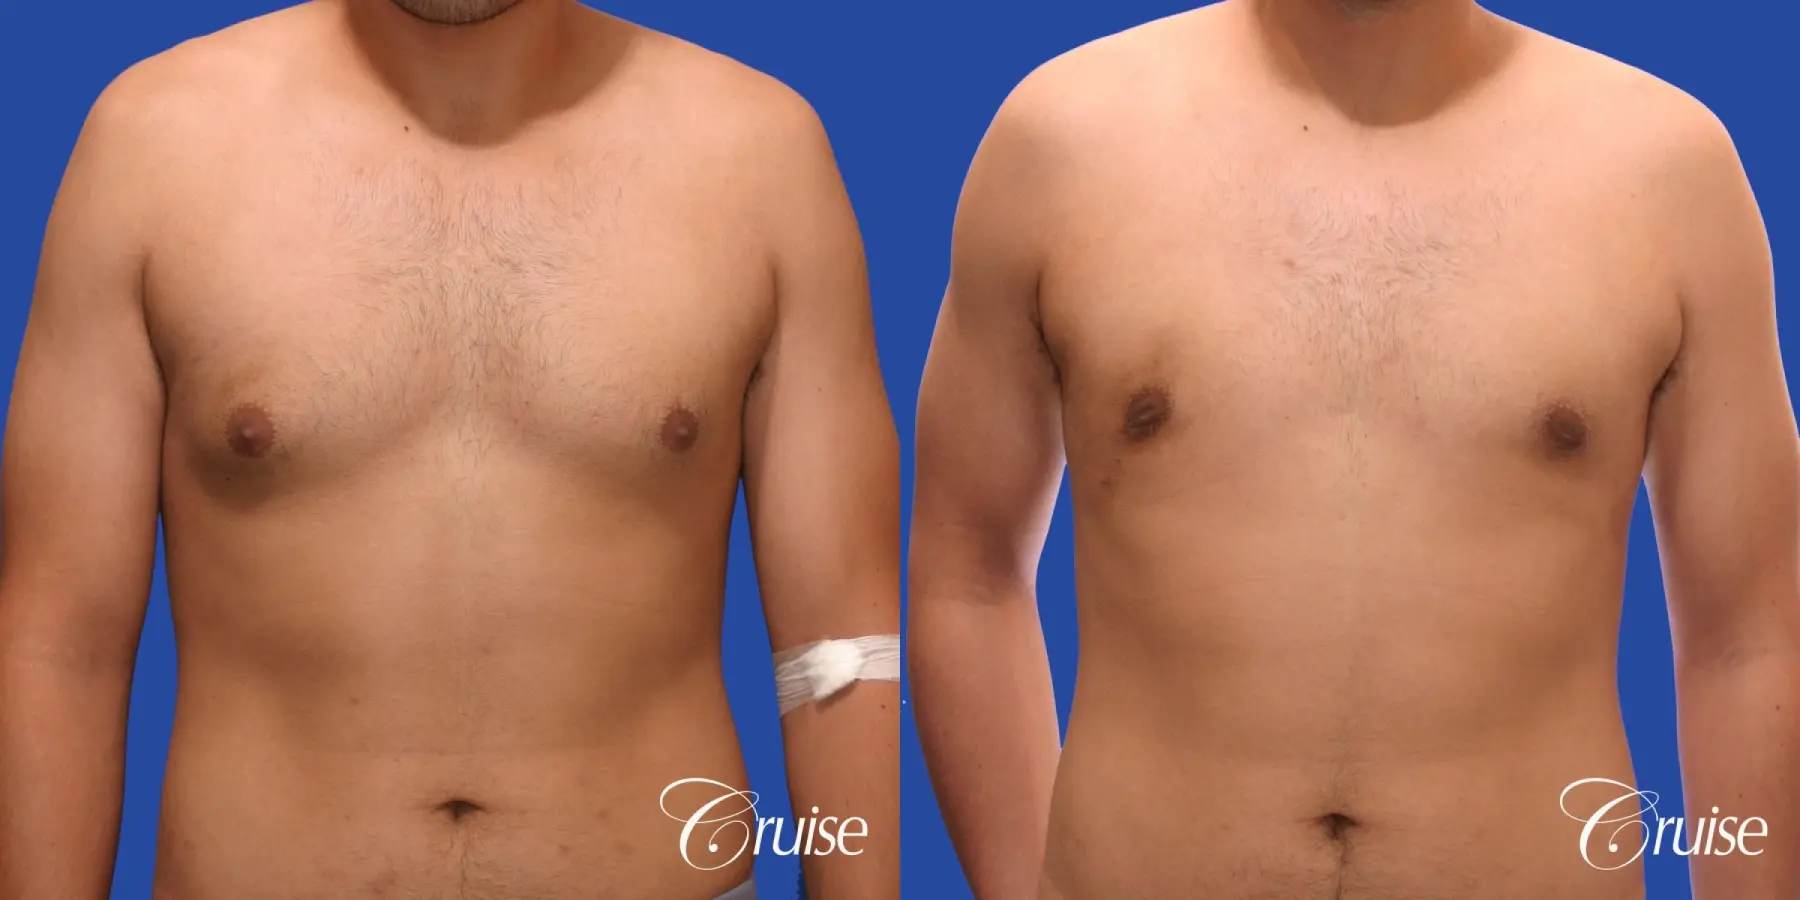 mild gynecomastia standard PA areola incision - Before and After 1